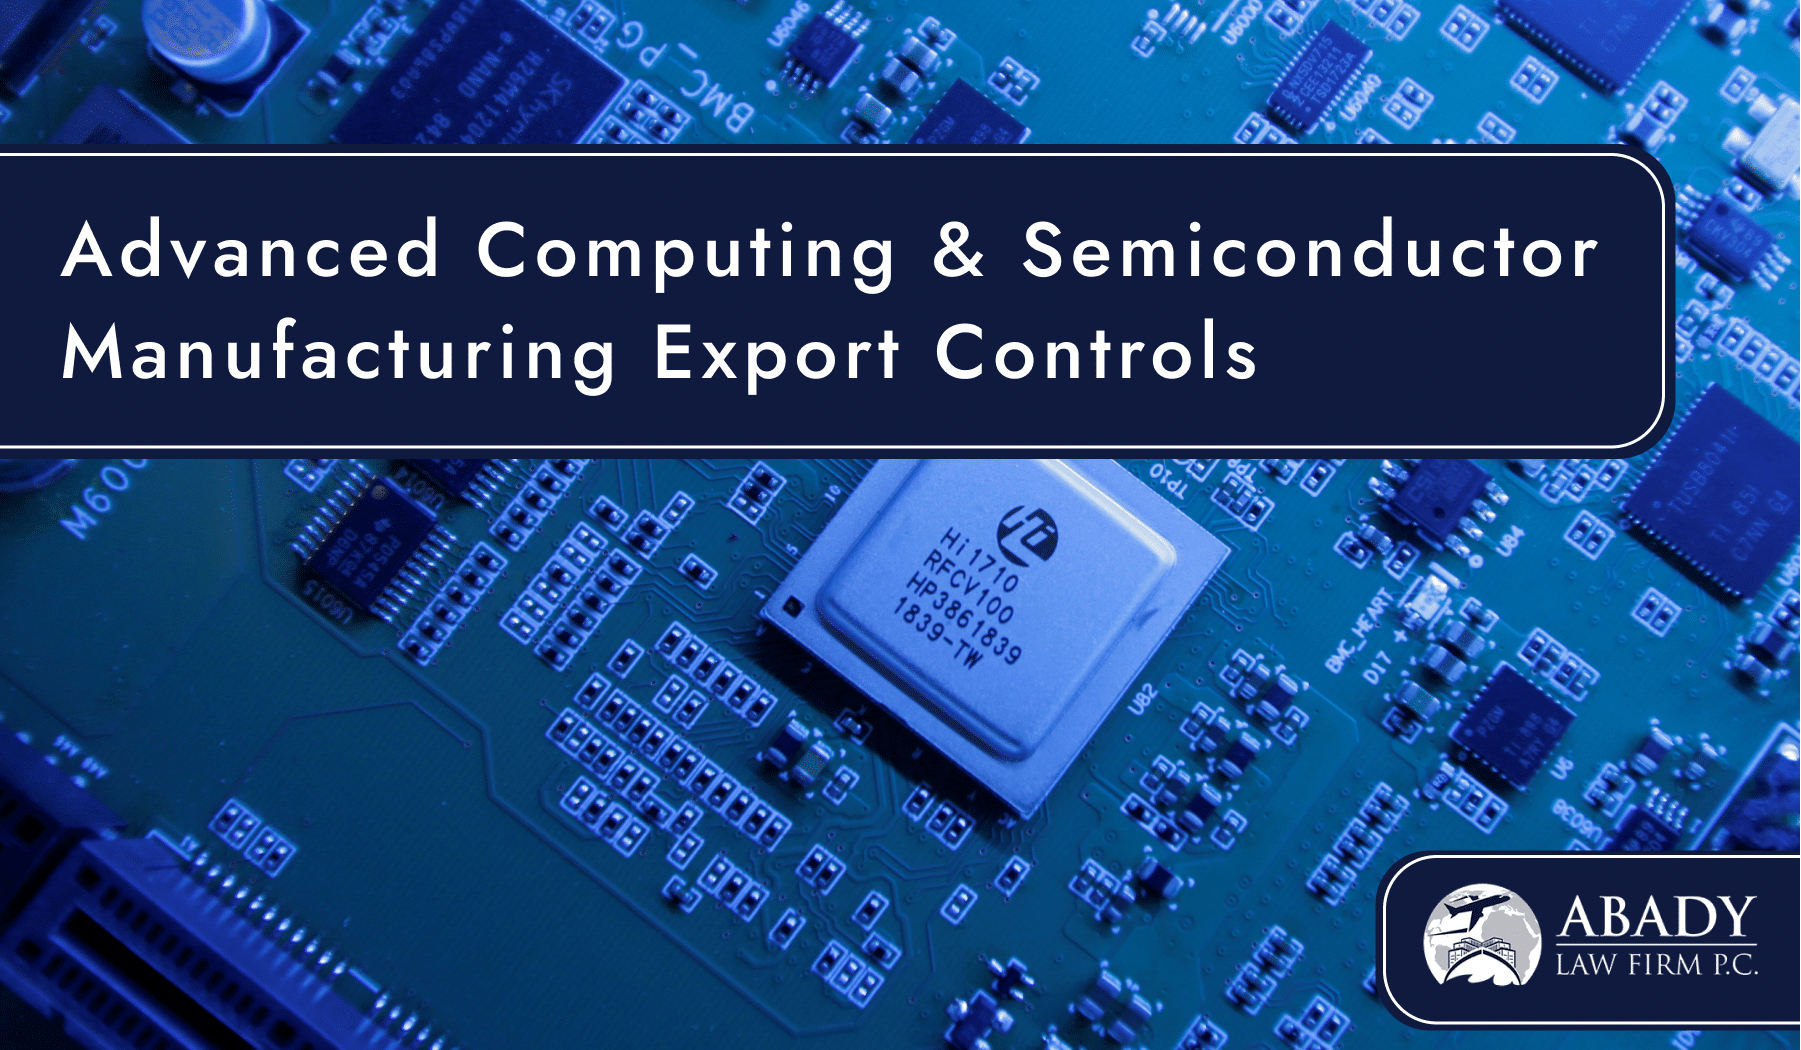 advanced computing and semiconductor manufacturing export regulations